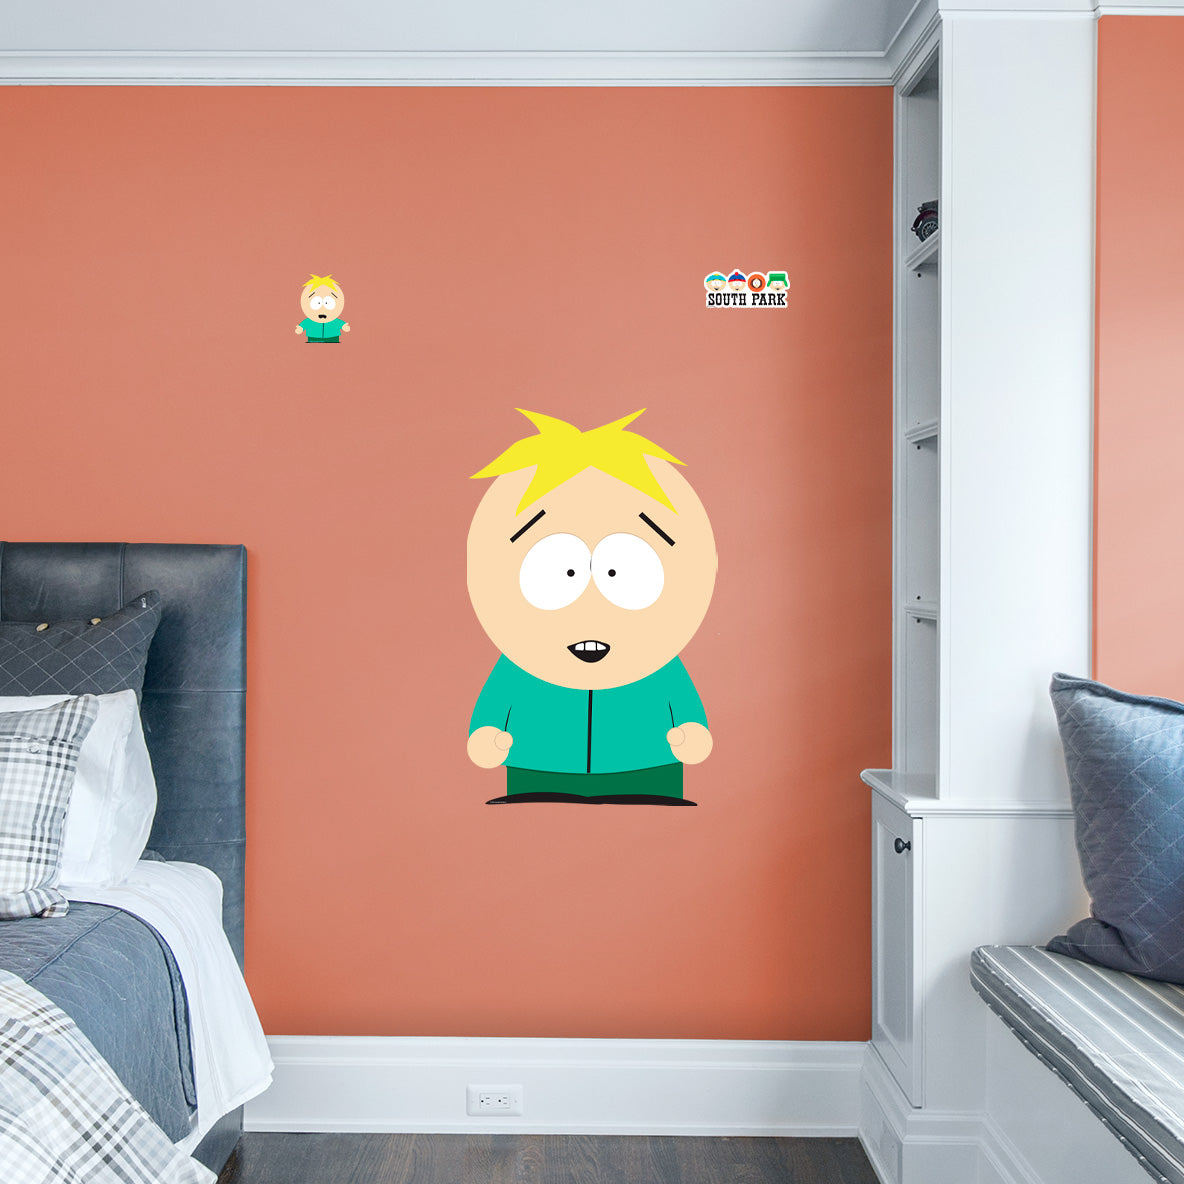 South Park: Butters RealBig        - Officially Licensed Paramount Removable     Adhesive Decal